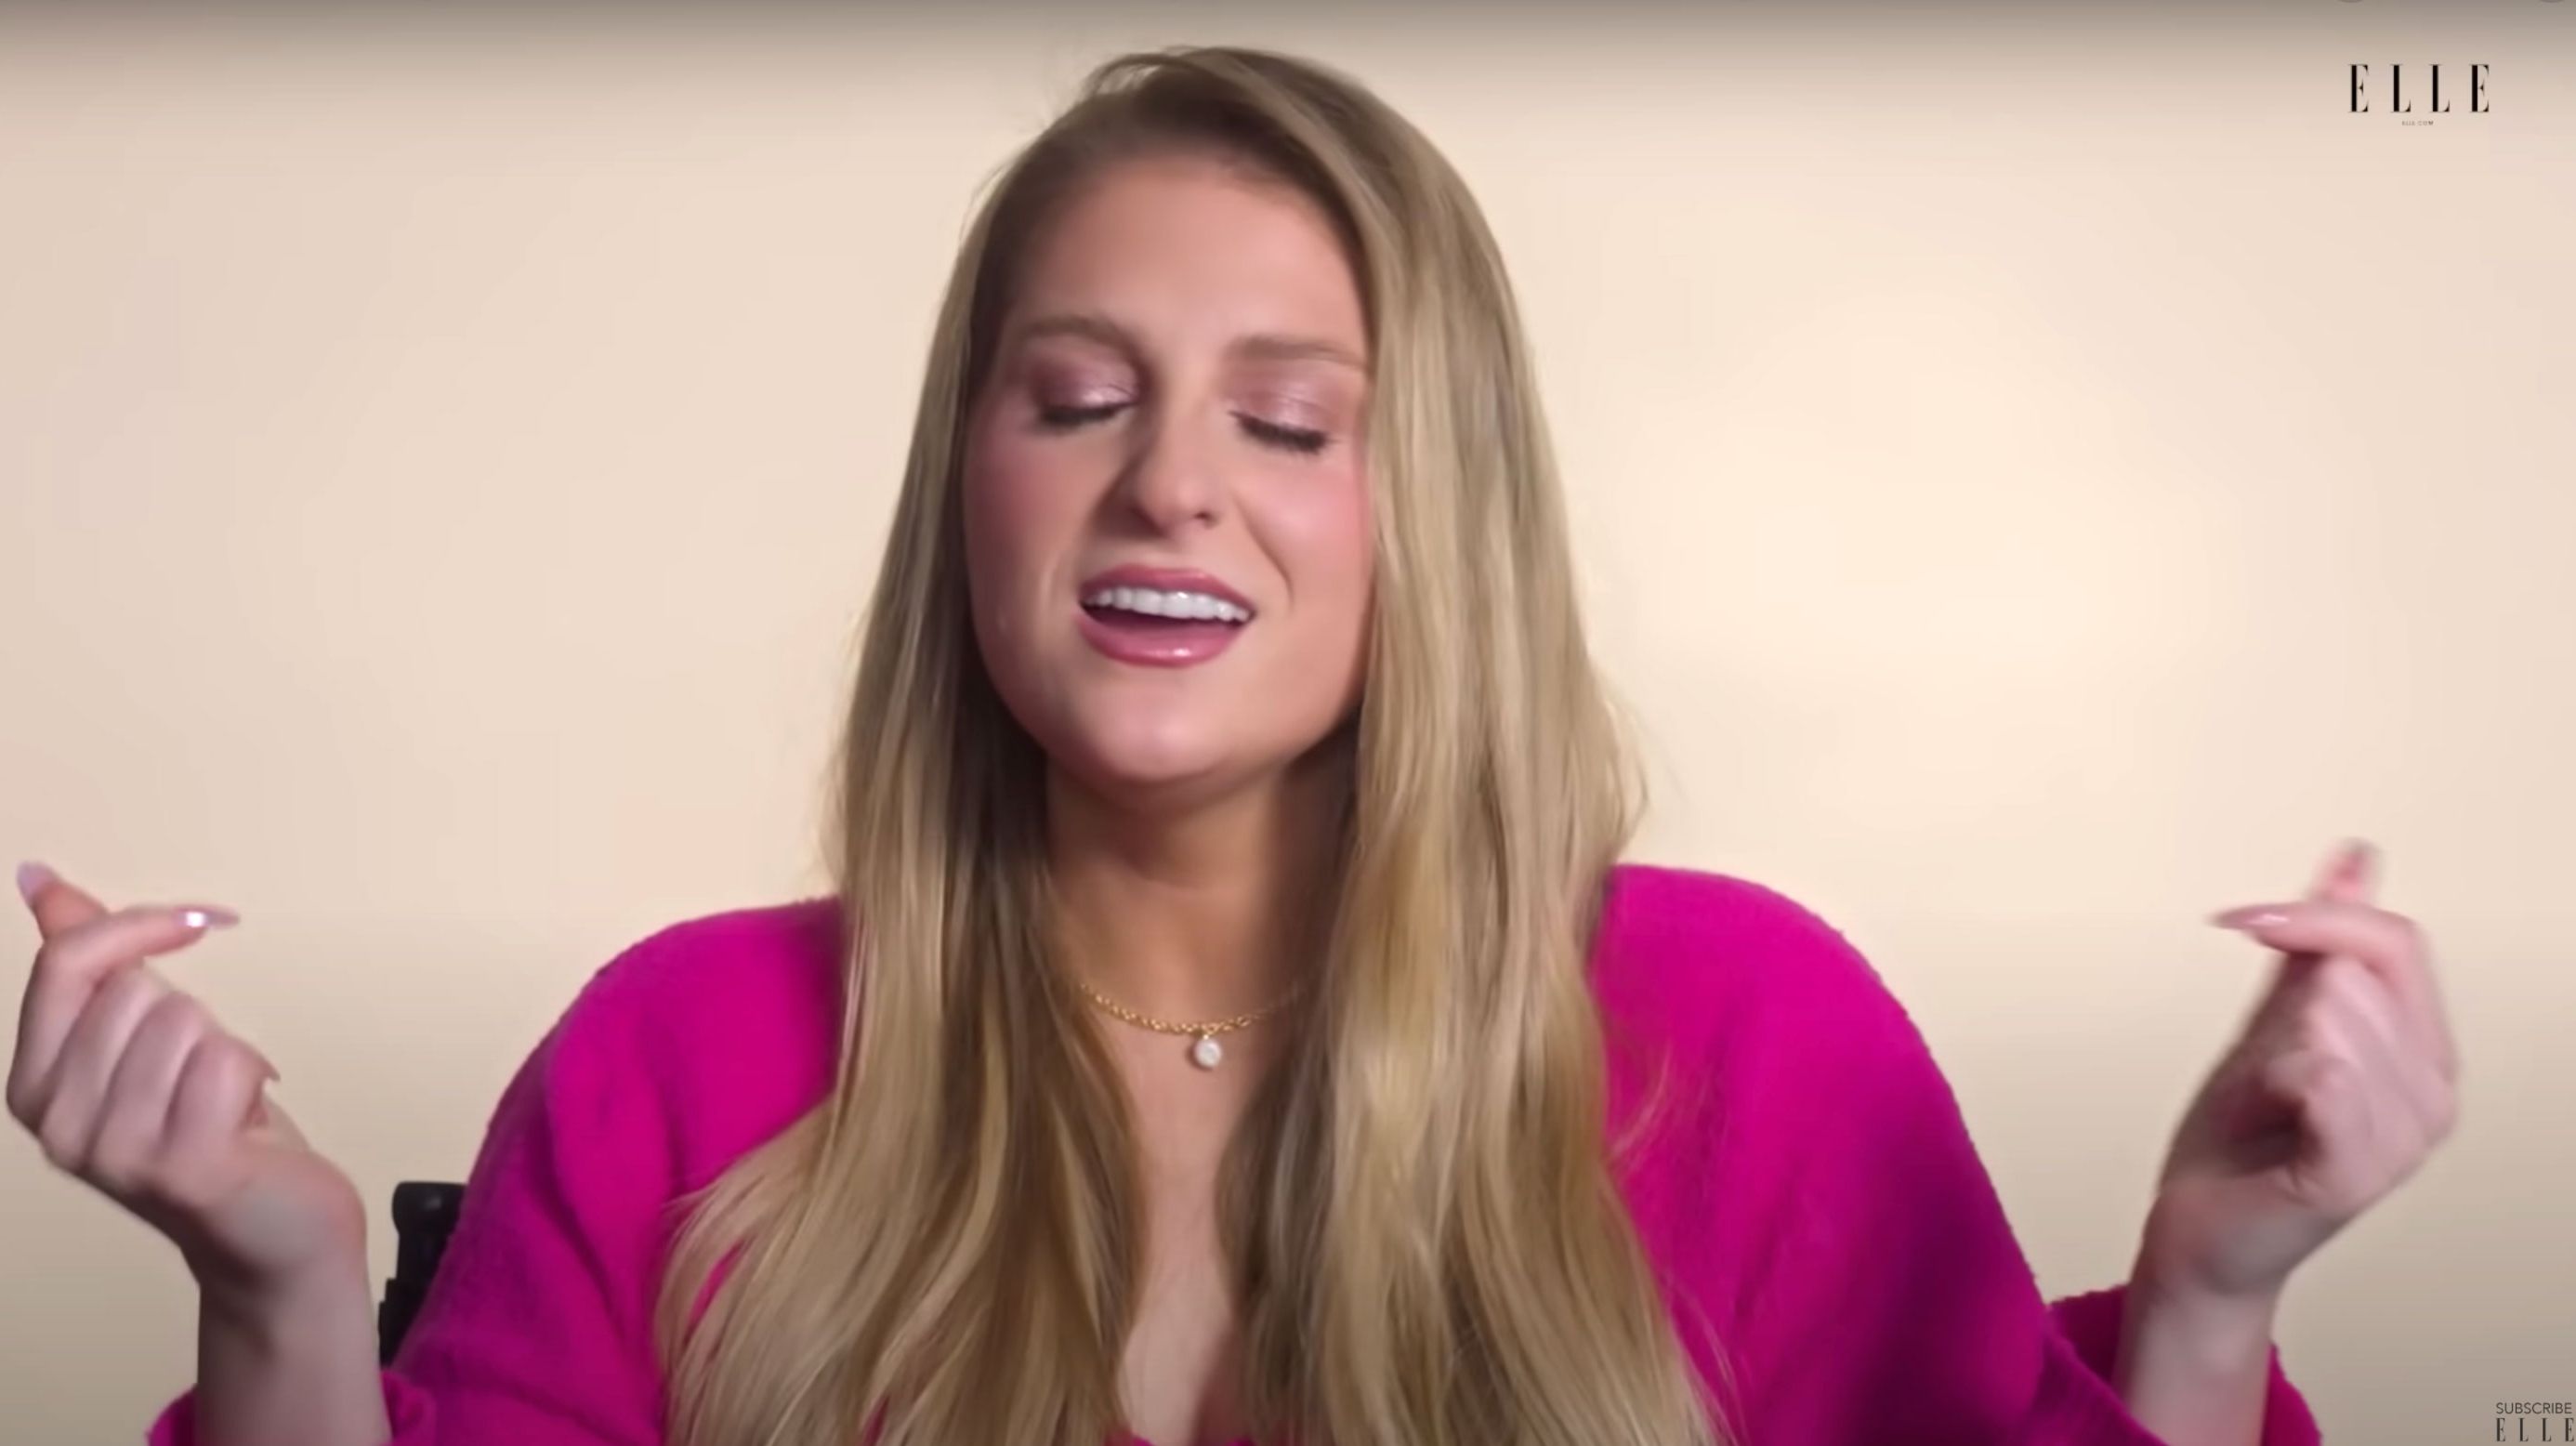 Meghan Trainor on Painful Sex & Wishing Her Husband Was 'Smaller